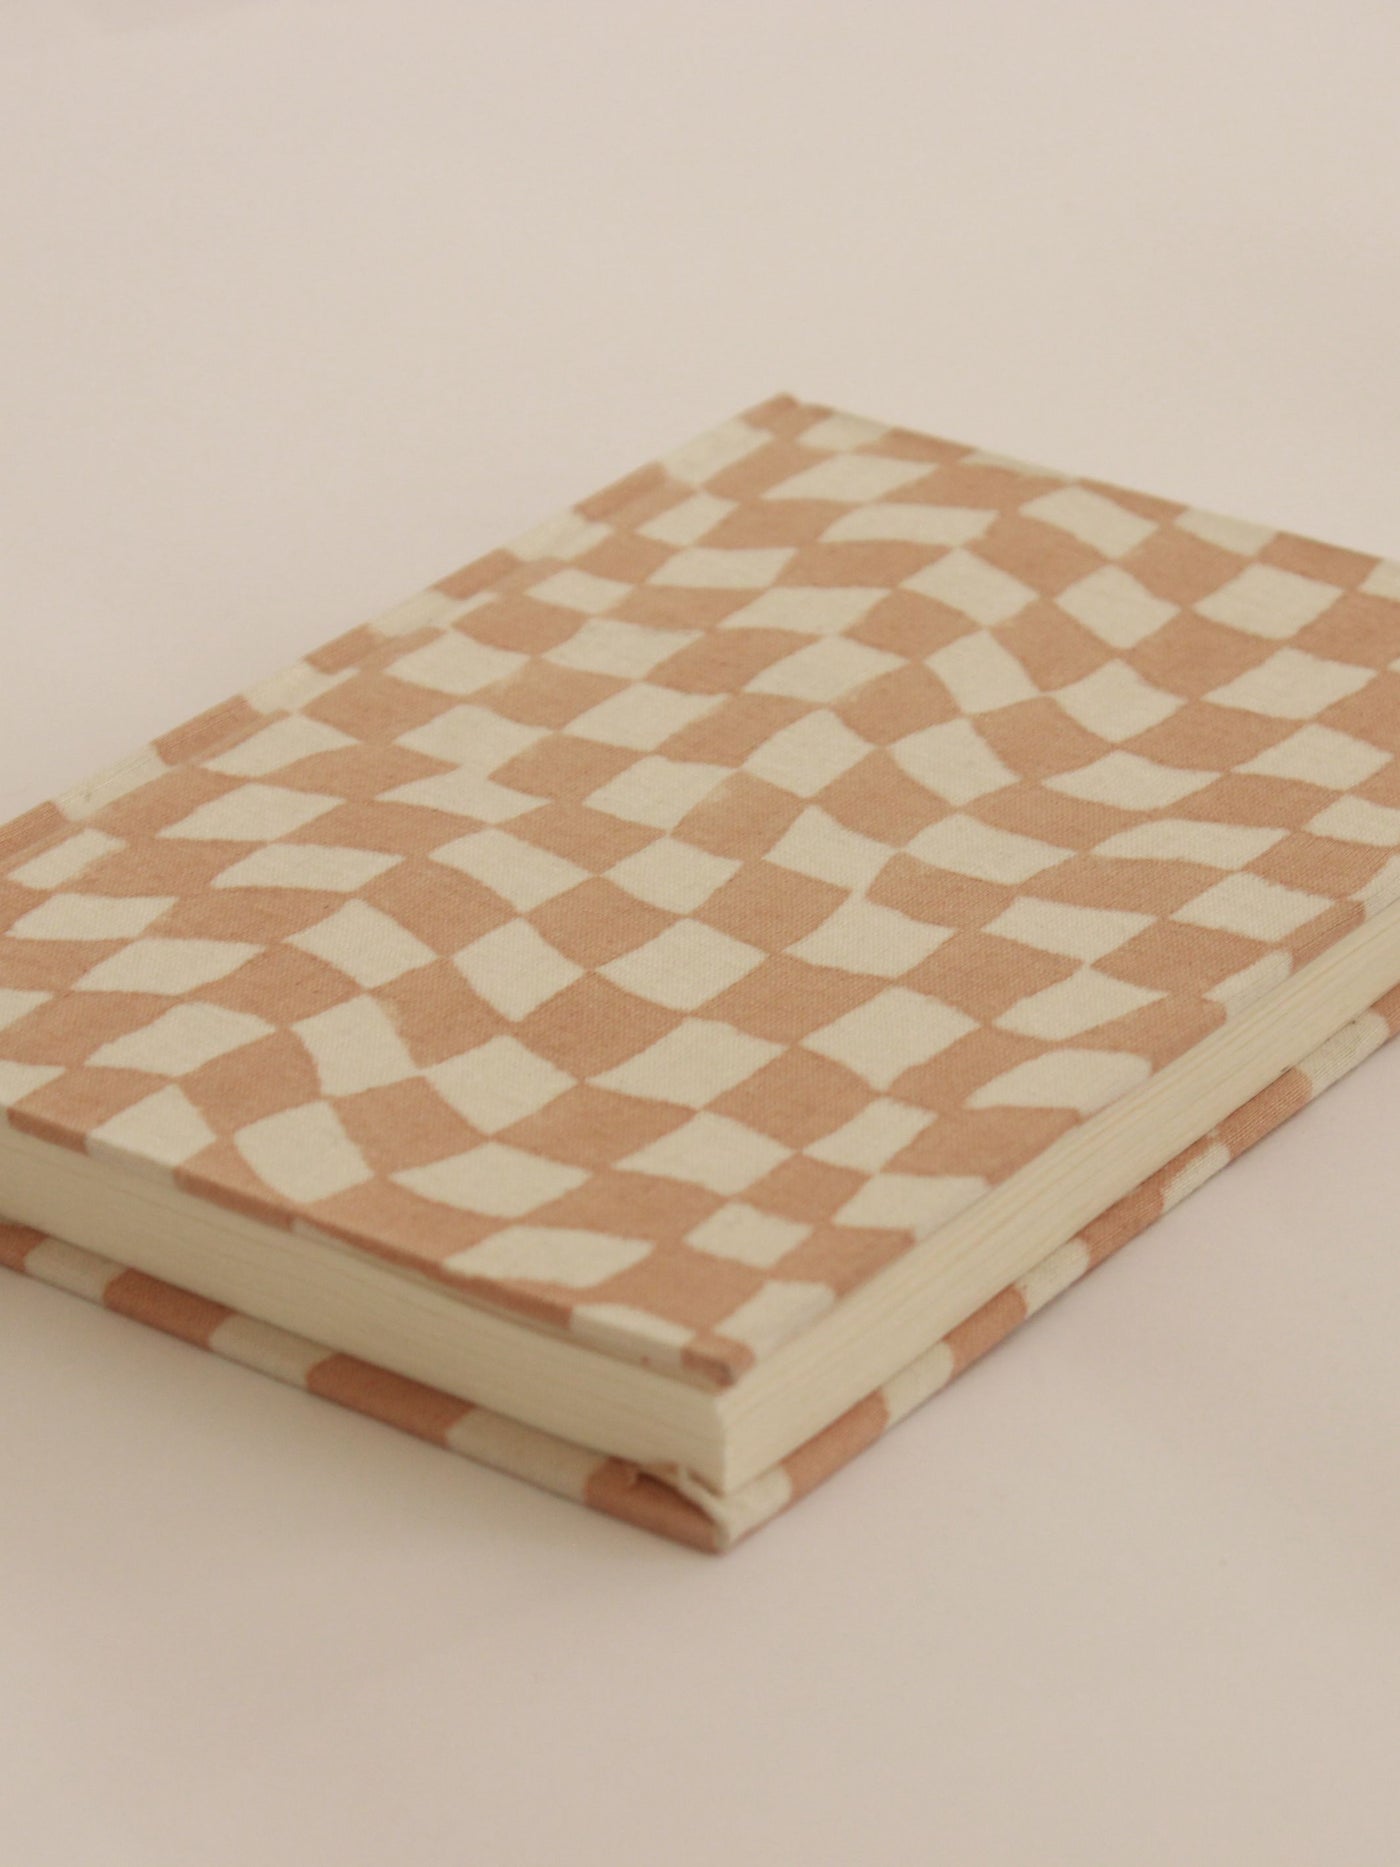 A5 Diary - Checkered Journal - Handcrafted Sustainable